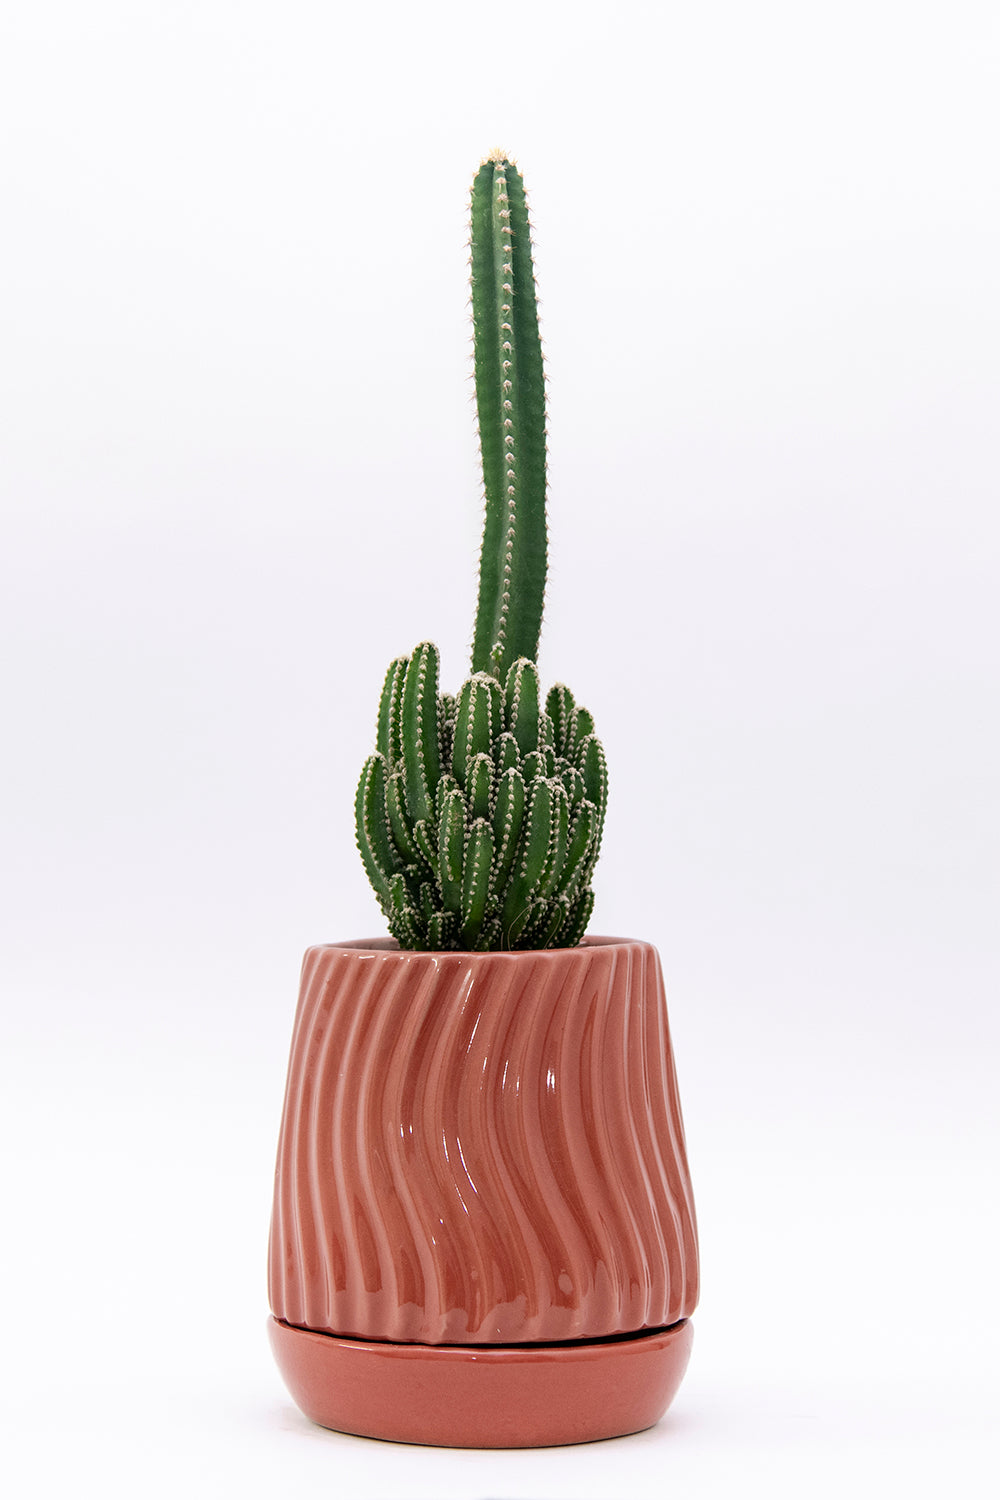 Extra Small size Fallen Angels ceramic tabletop in Coralpink color with cactus in it.